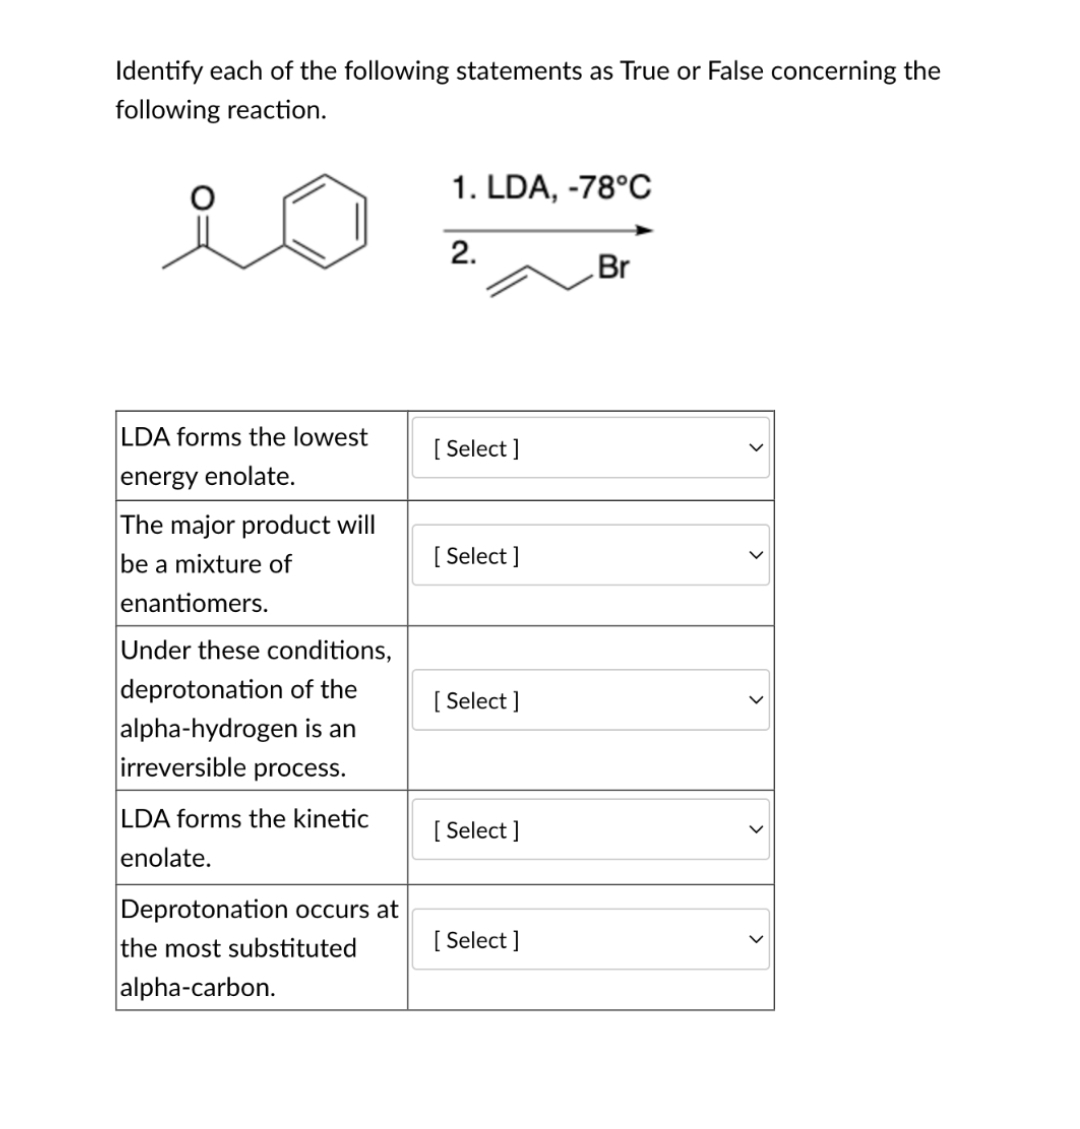 Identify each of the following statements as True or False concerning the
following reaction.
LDA forms the lowest
energy enolate.
The major product will
be a mixture of
enantiomers.
Under these conditions,
deprotonation of the
alpha-hydrogen is an
irreversible process.
LDA forms the kinetic
enolate.
Deprotonation occurs at
the most substituted
alpha-carbon.
1. LDA, -78°C
2.
[Select]
[Select]
[Select]
[Select]
[Select]
Br